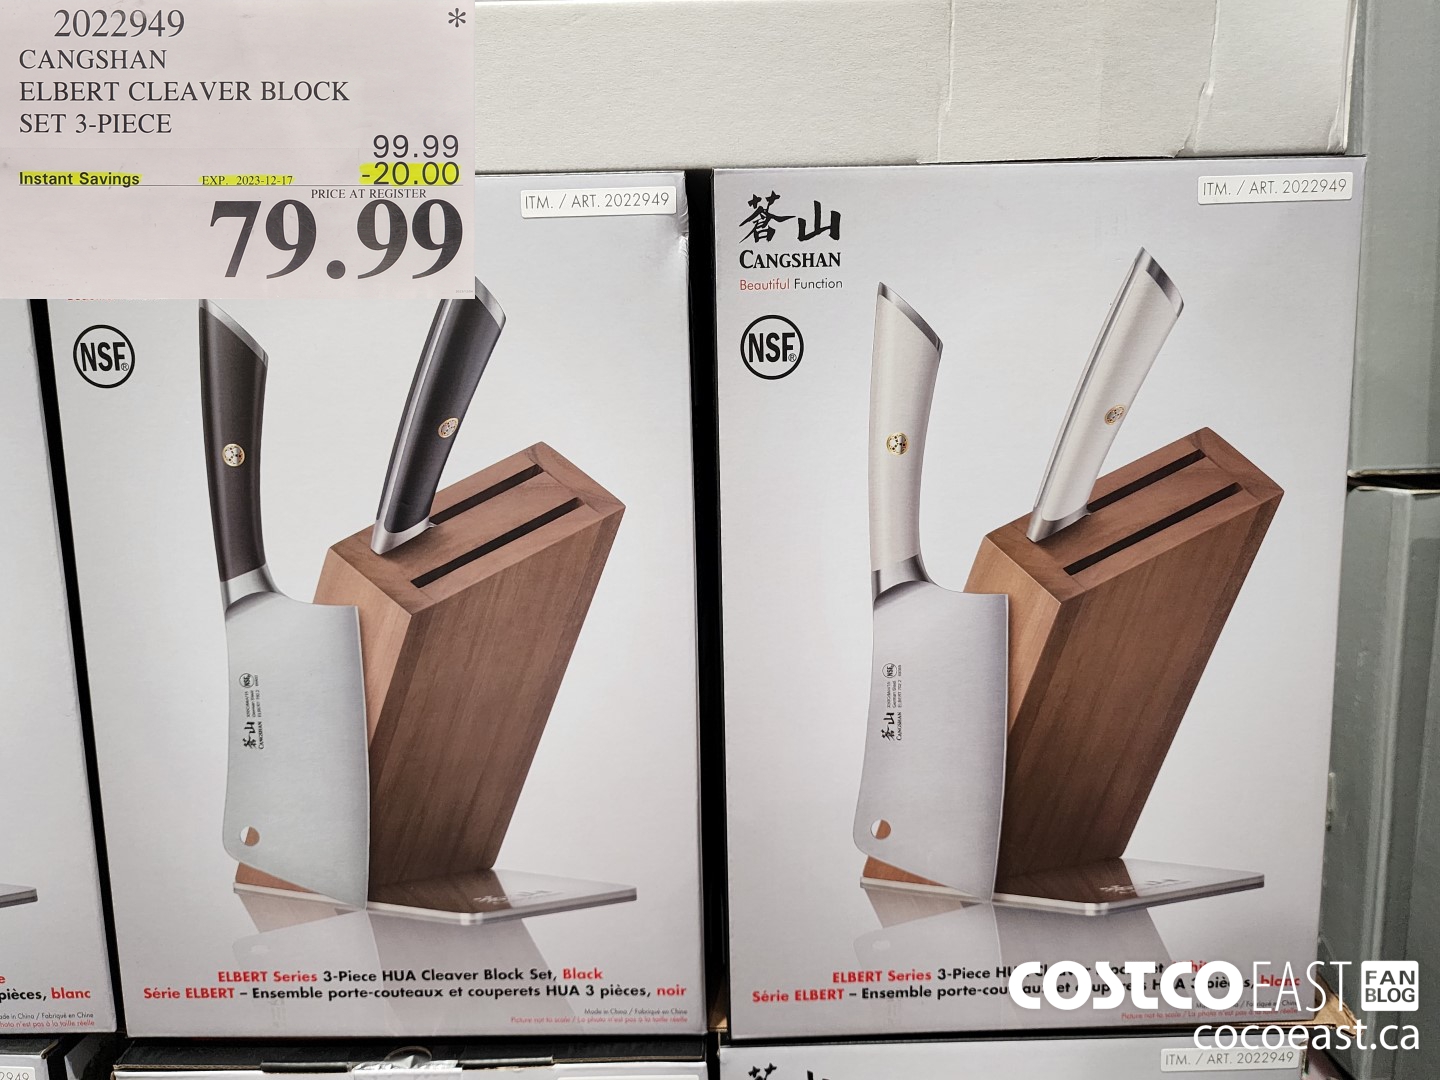 1363859 DURACELL LED LANTERN PACK OF 2 19 99 - Costco East Fan Blog